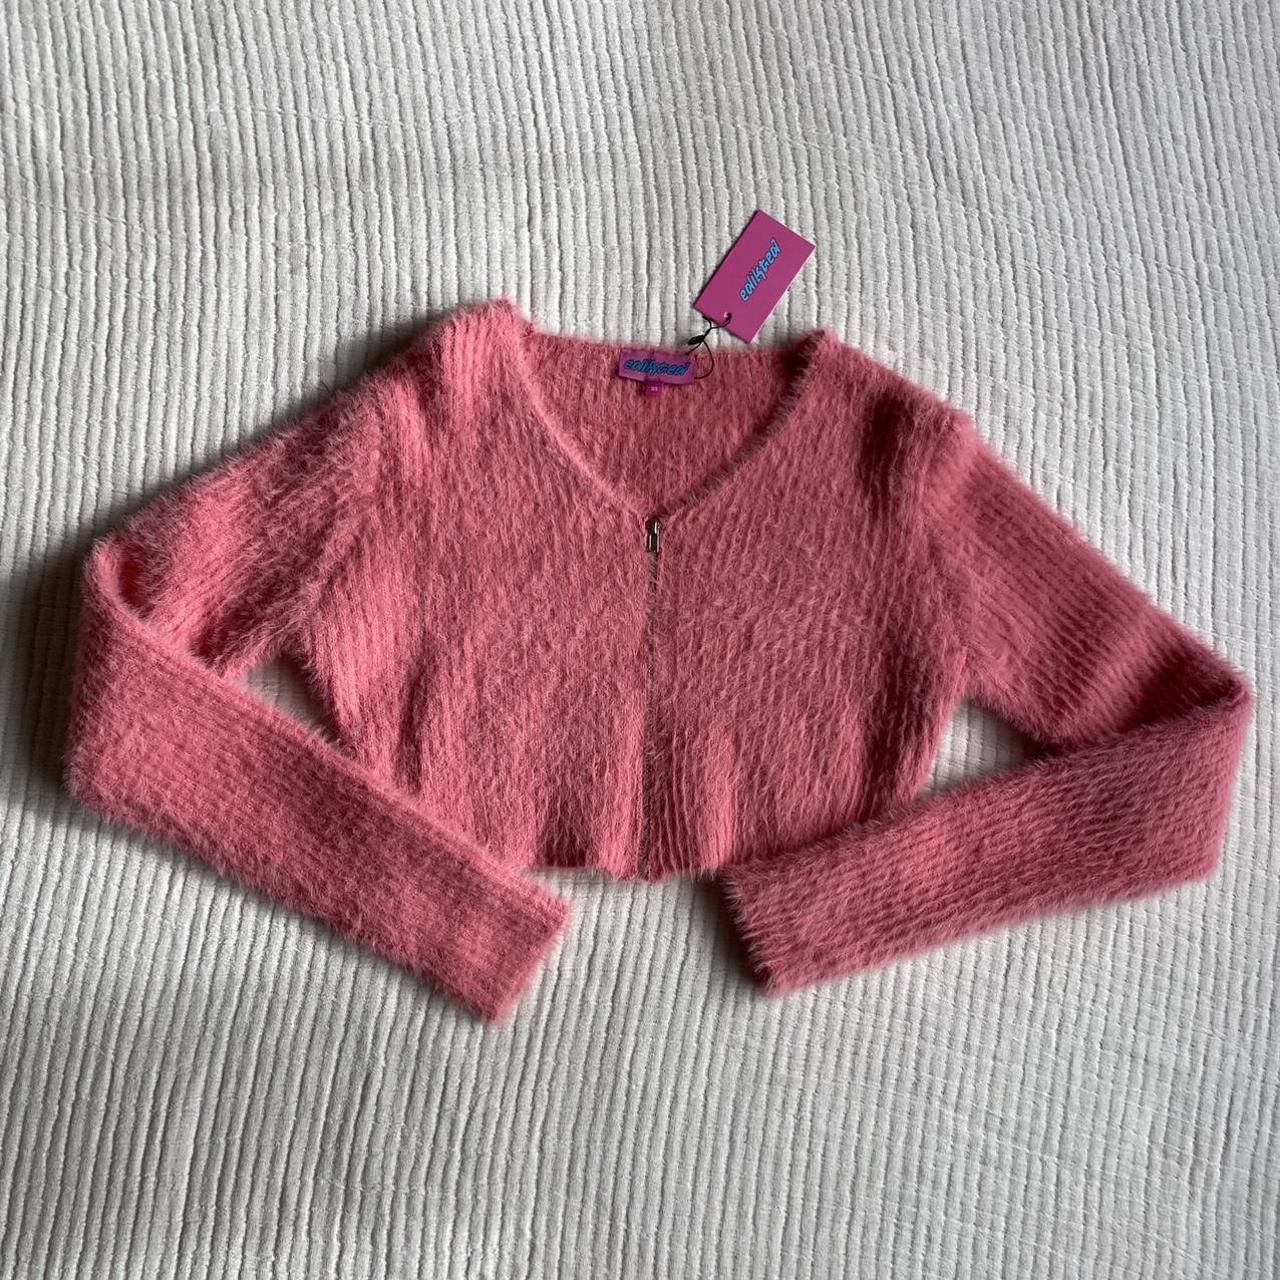 Product Image 2 - Edikted Pink Fuzzy Zip Up💓
So